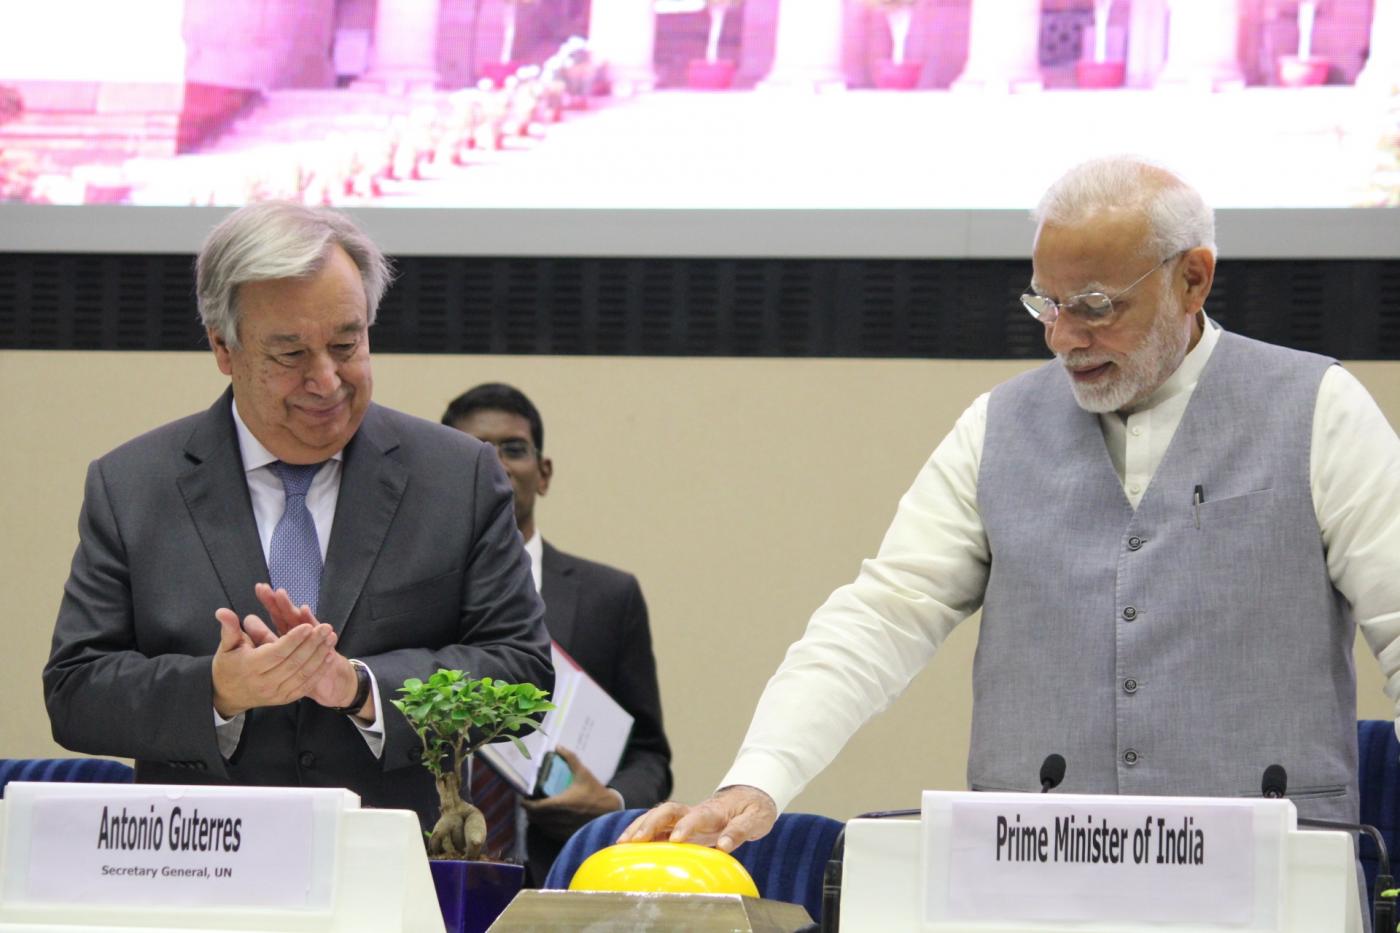 New Delhi: Prime Minister Narendra Modi and United Nations Secretary-General Antonio Guterres at the second Global RE-Invest - investment summit in New Delhi on Oct 2, 2018. (Photo: Amlan Paliwal/IANS) by .